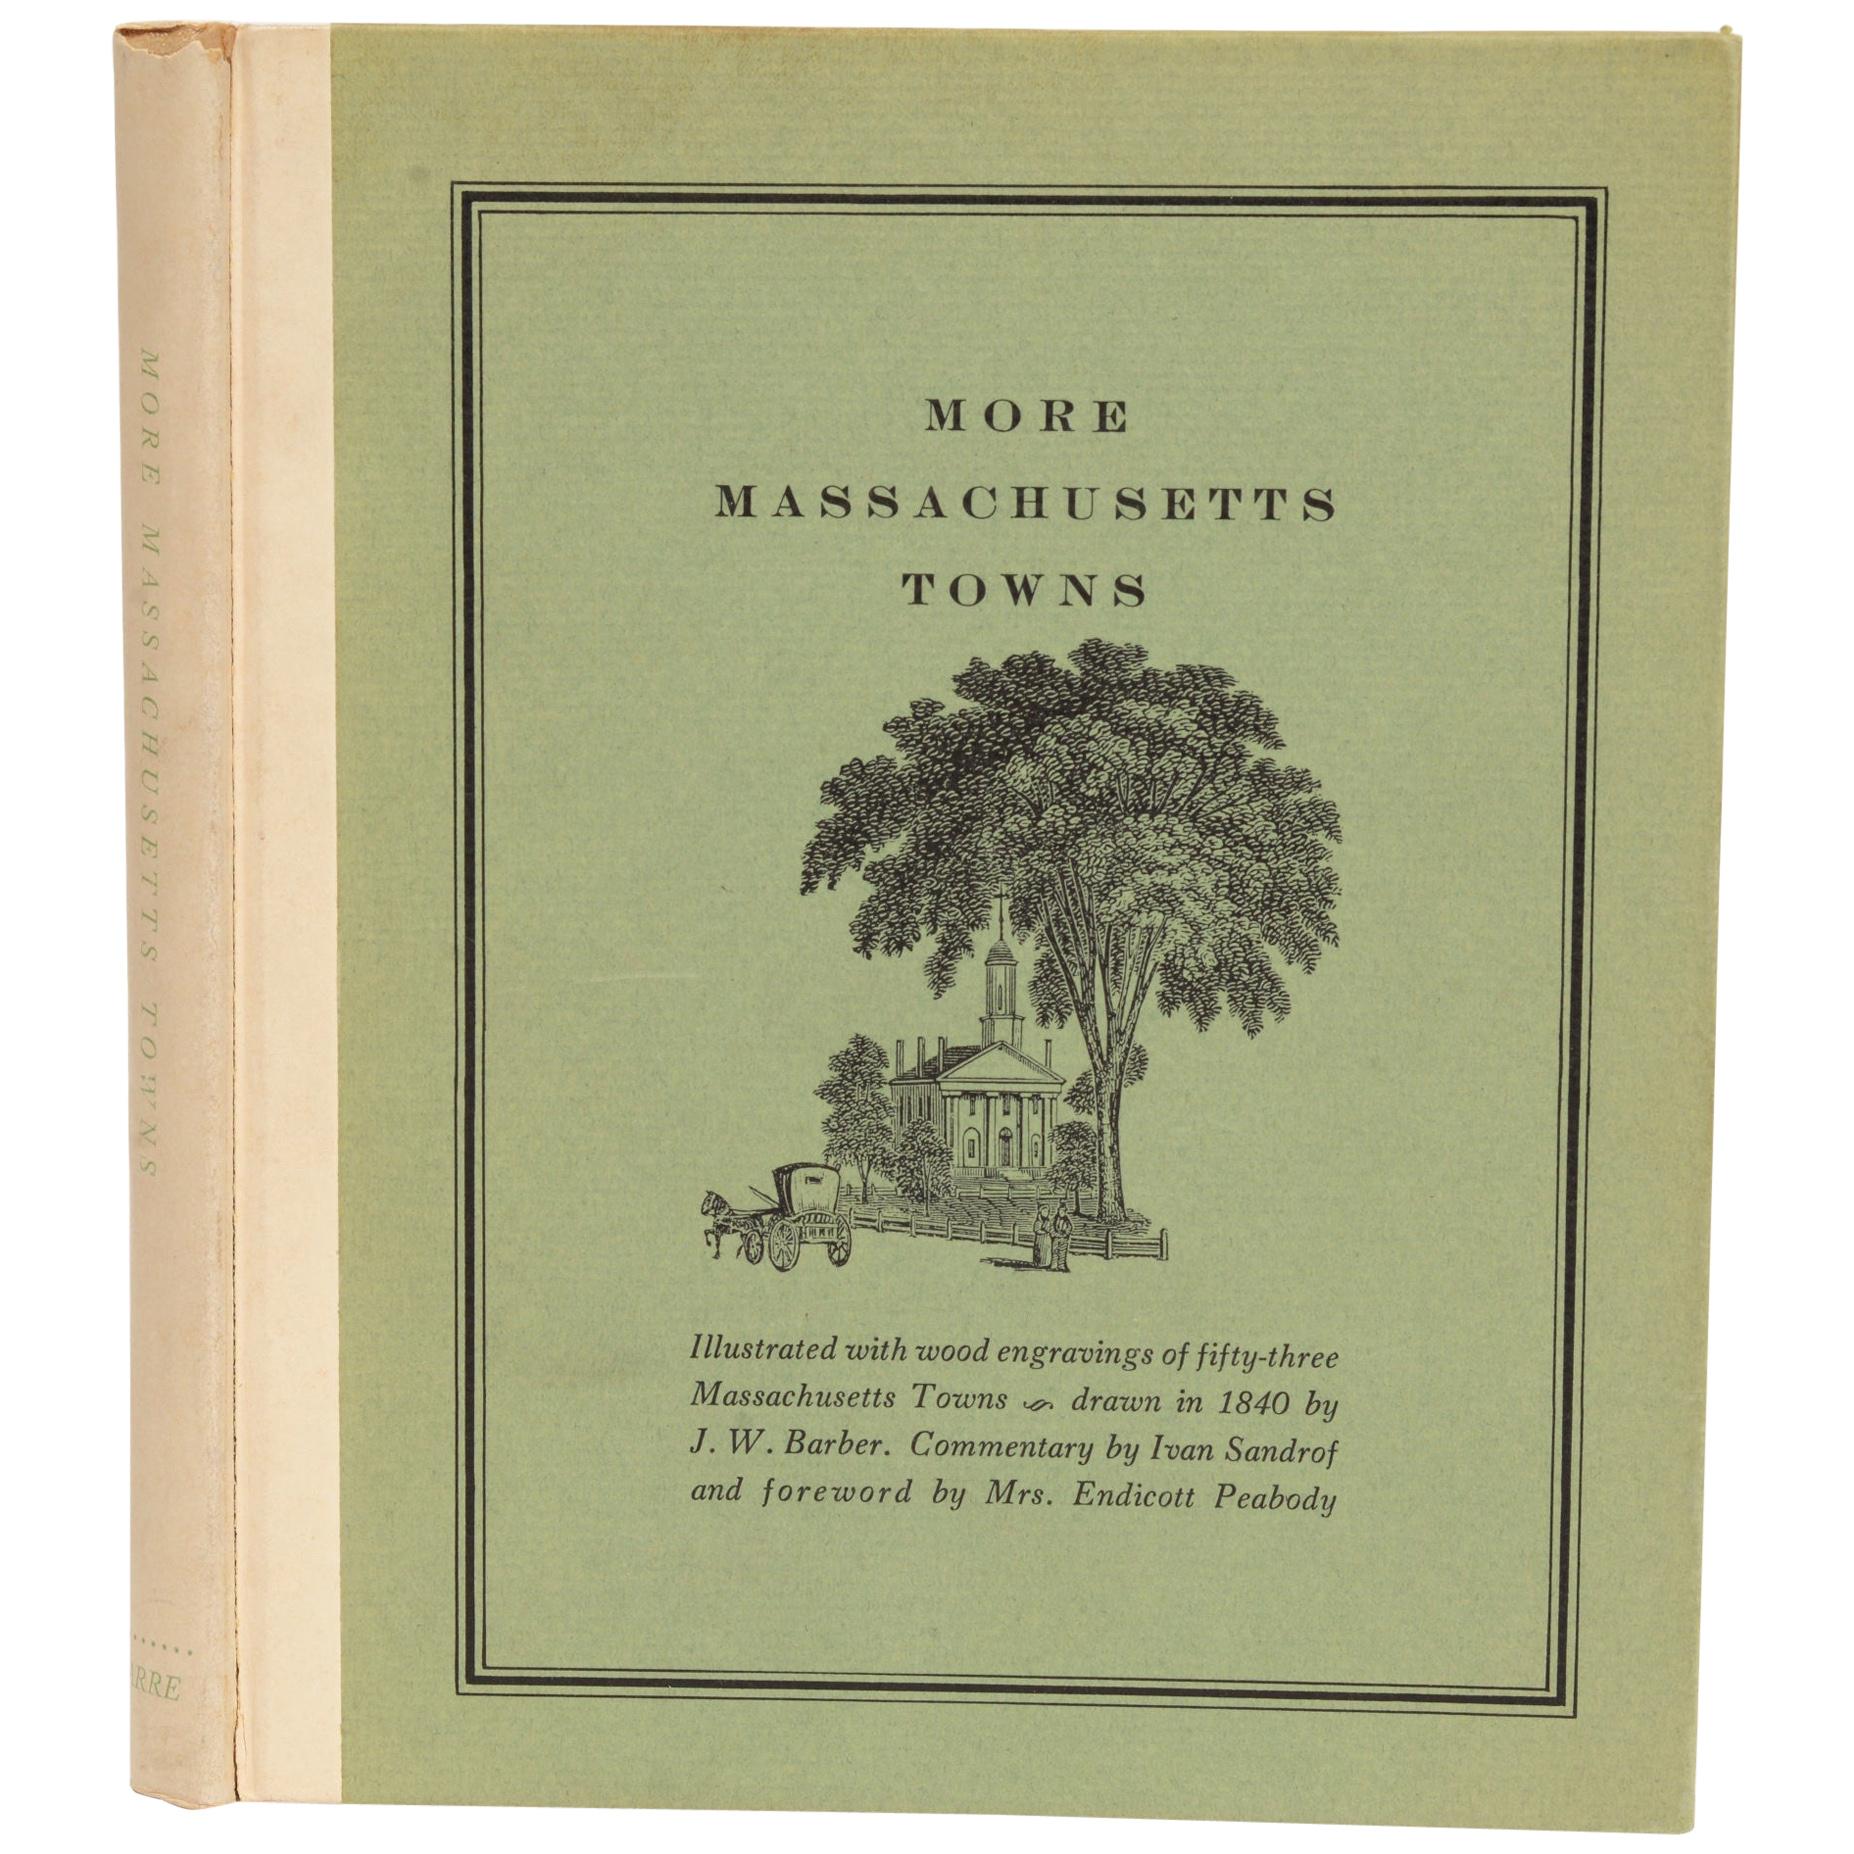 More Massachusetts Towns:: Illustrated with Wood Engravings of 53 Mass. Villes